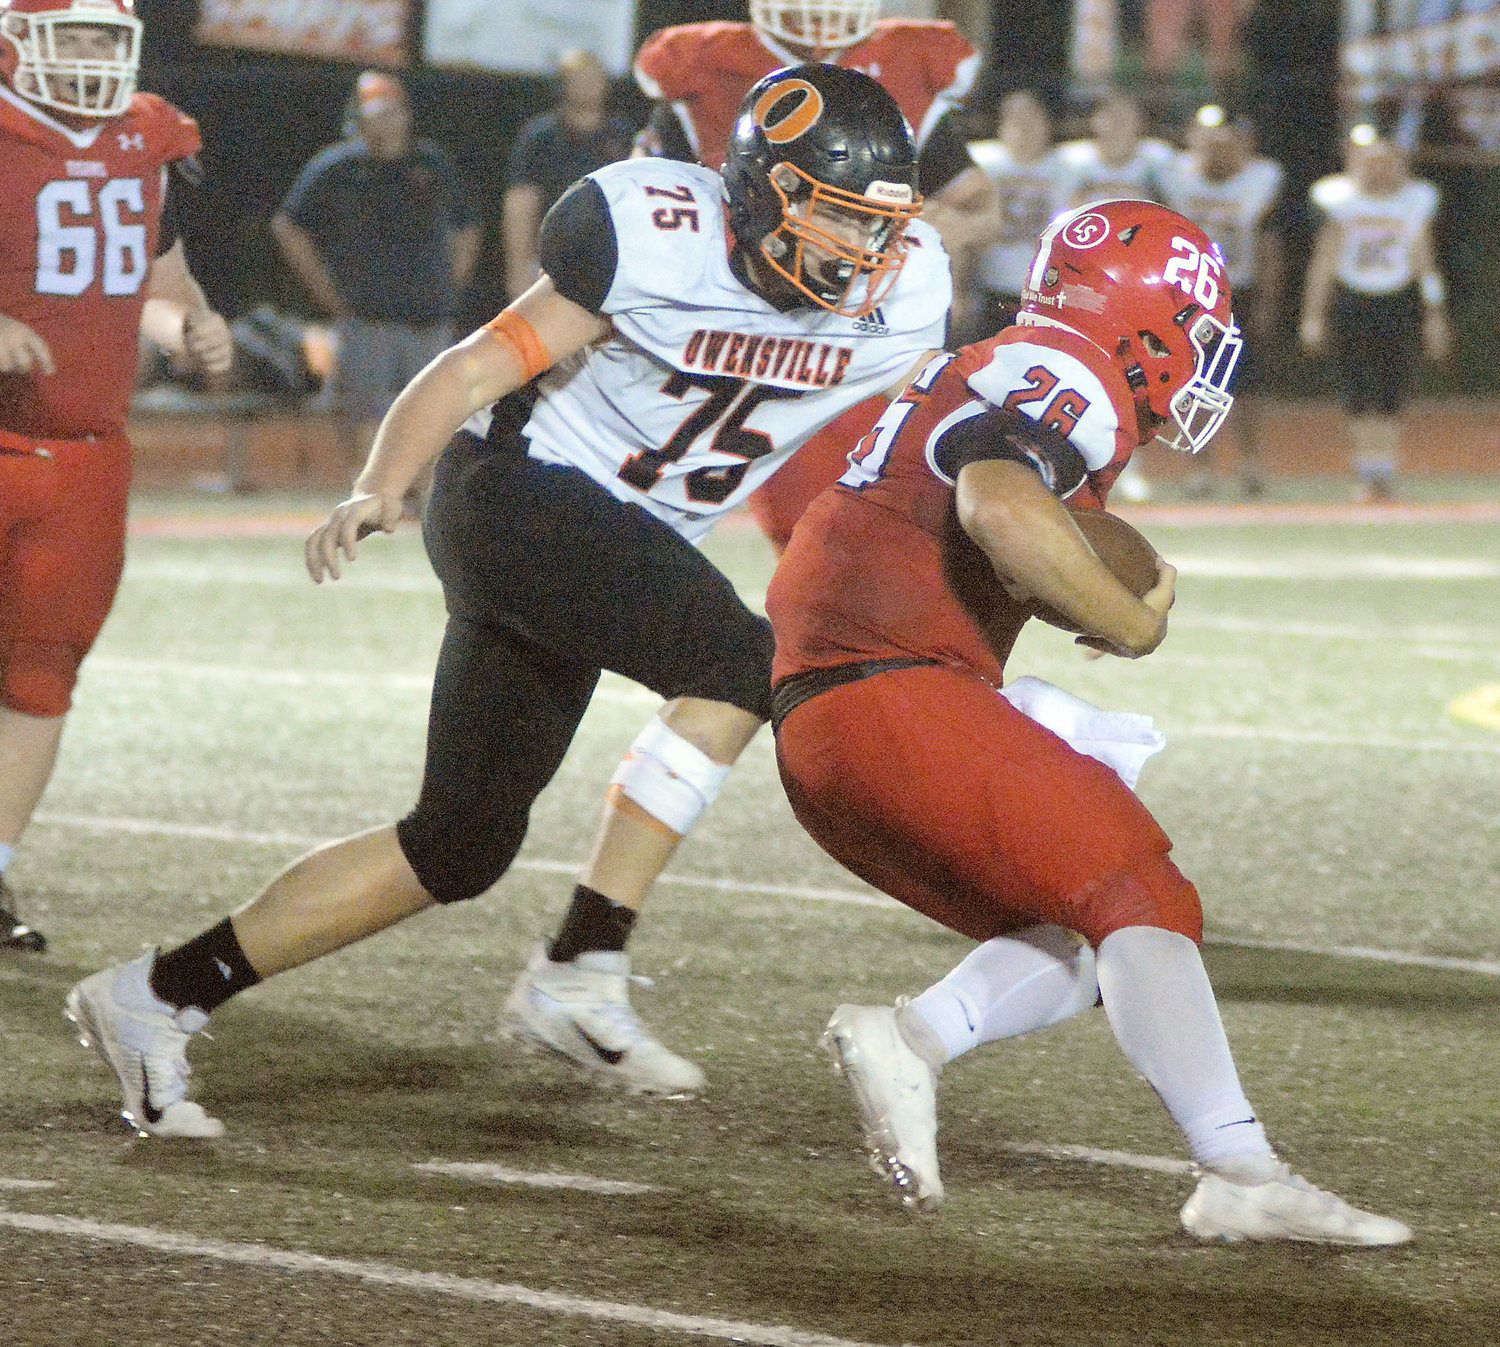 Garrett Crosby (left) closes in on St. James Tiger quarterback Cooper Harlan for one of his five tackles on the night. Brent Helmig led the Dutchmen defense with a team-high 13 total tackles.